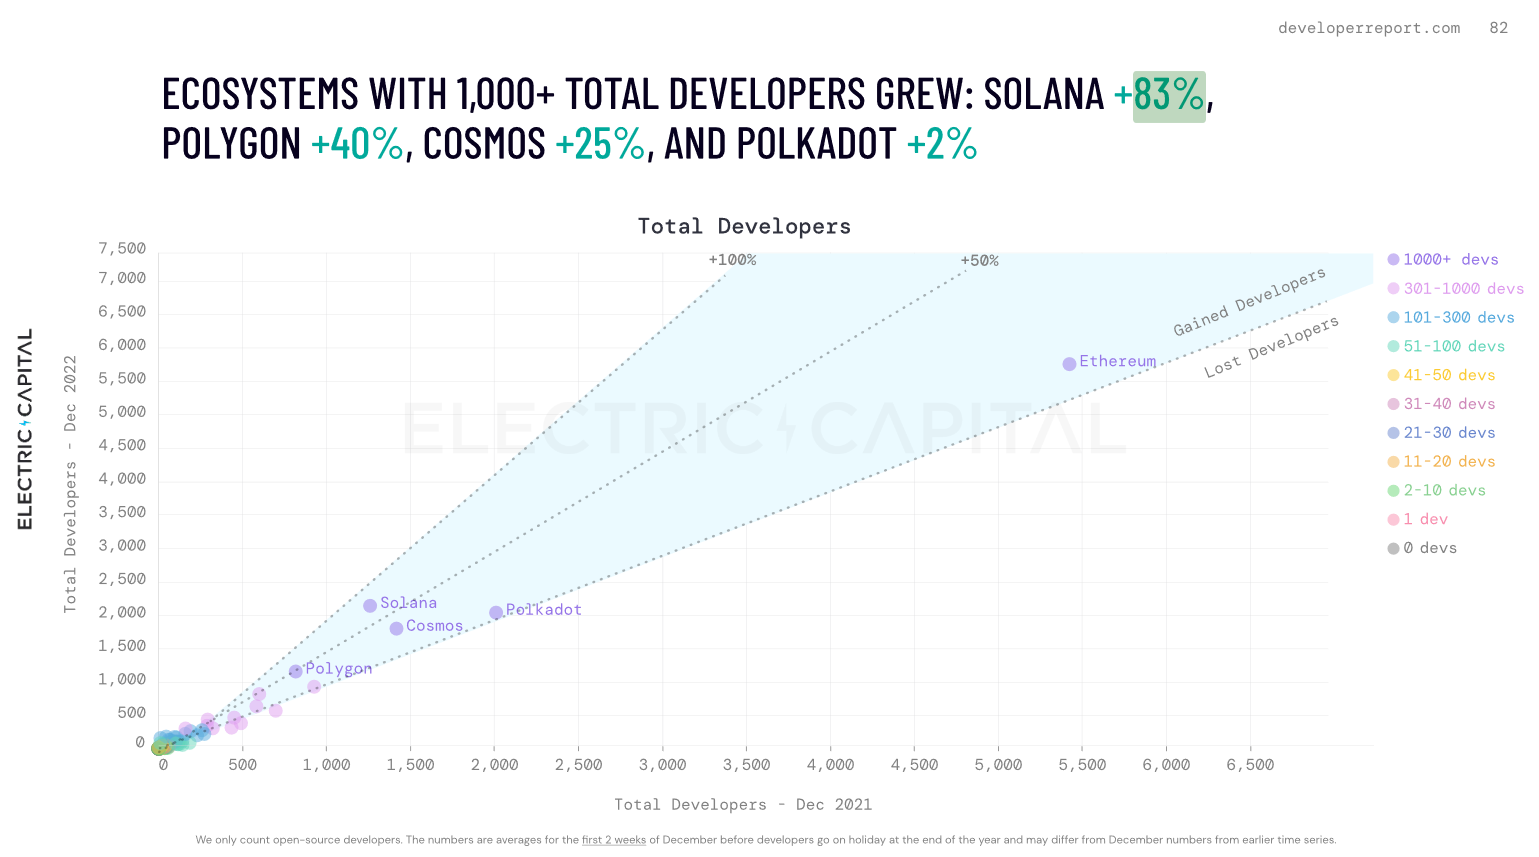 A chart showing the growth of developers on blockchains like Solana, Polygon, Cosmos and Polygon in 2022